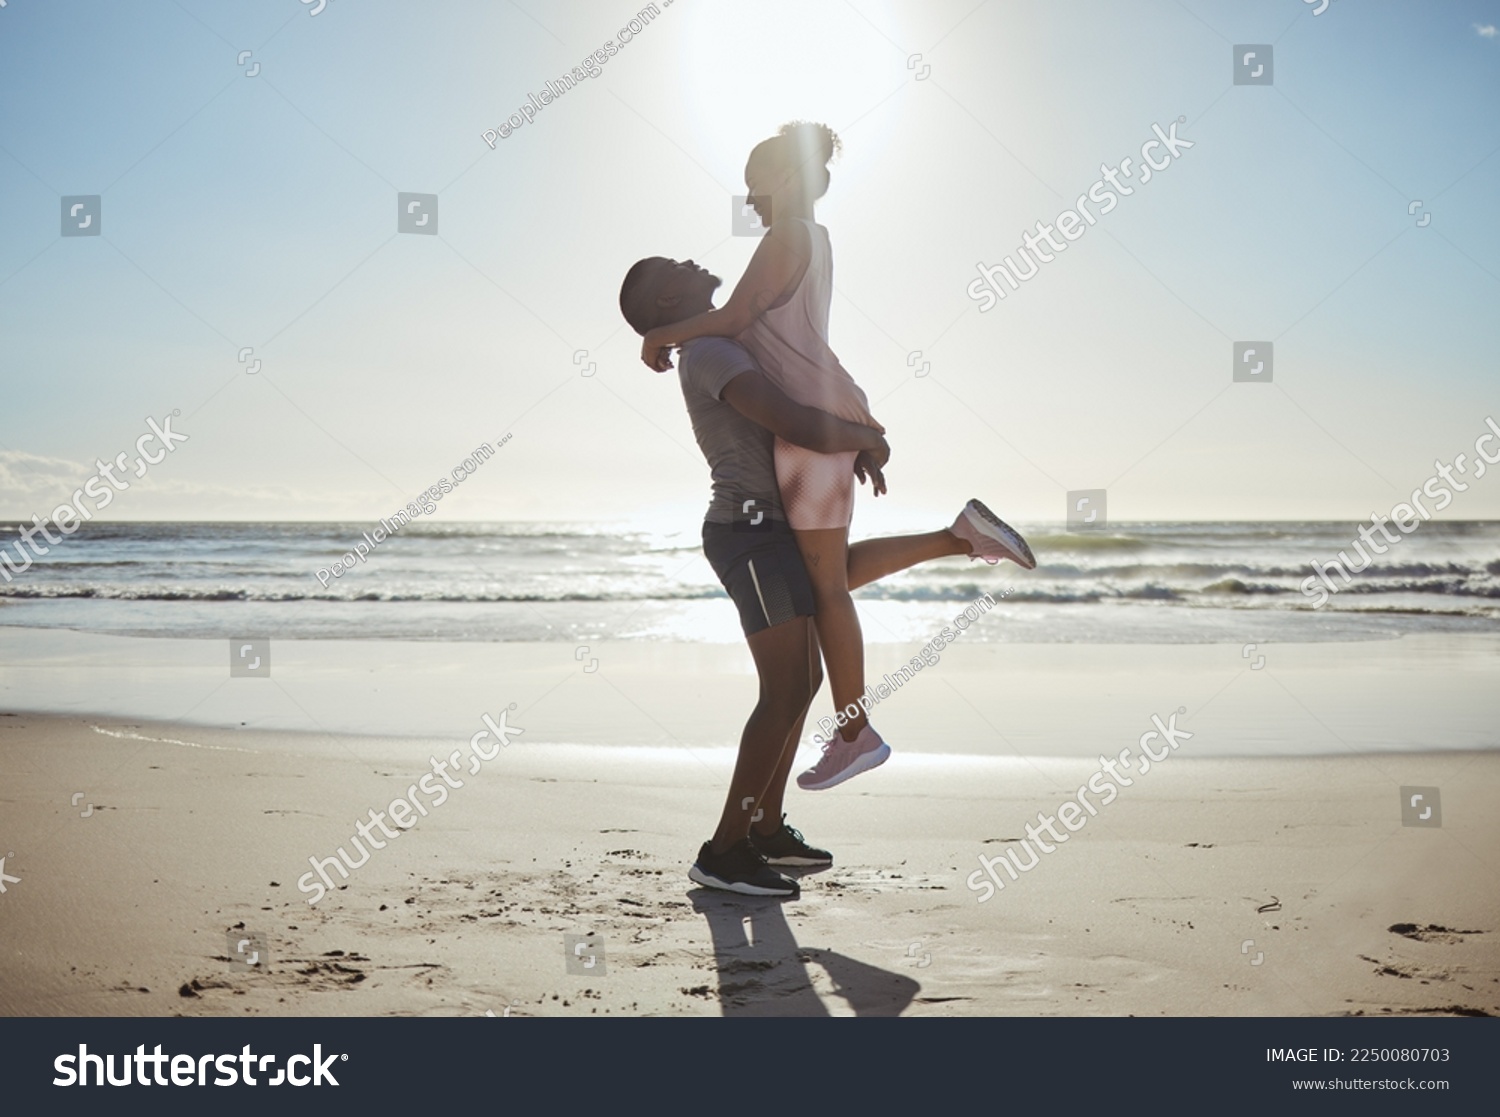 Love, beach sunset and black couple on travel holiday honeymoon for anniversary in Cancun Mexico spring break, summer fun and fitness run. Man, woman and happy relationship romance enjoy morning sun #2250080703